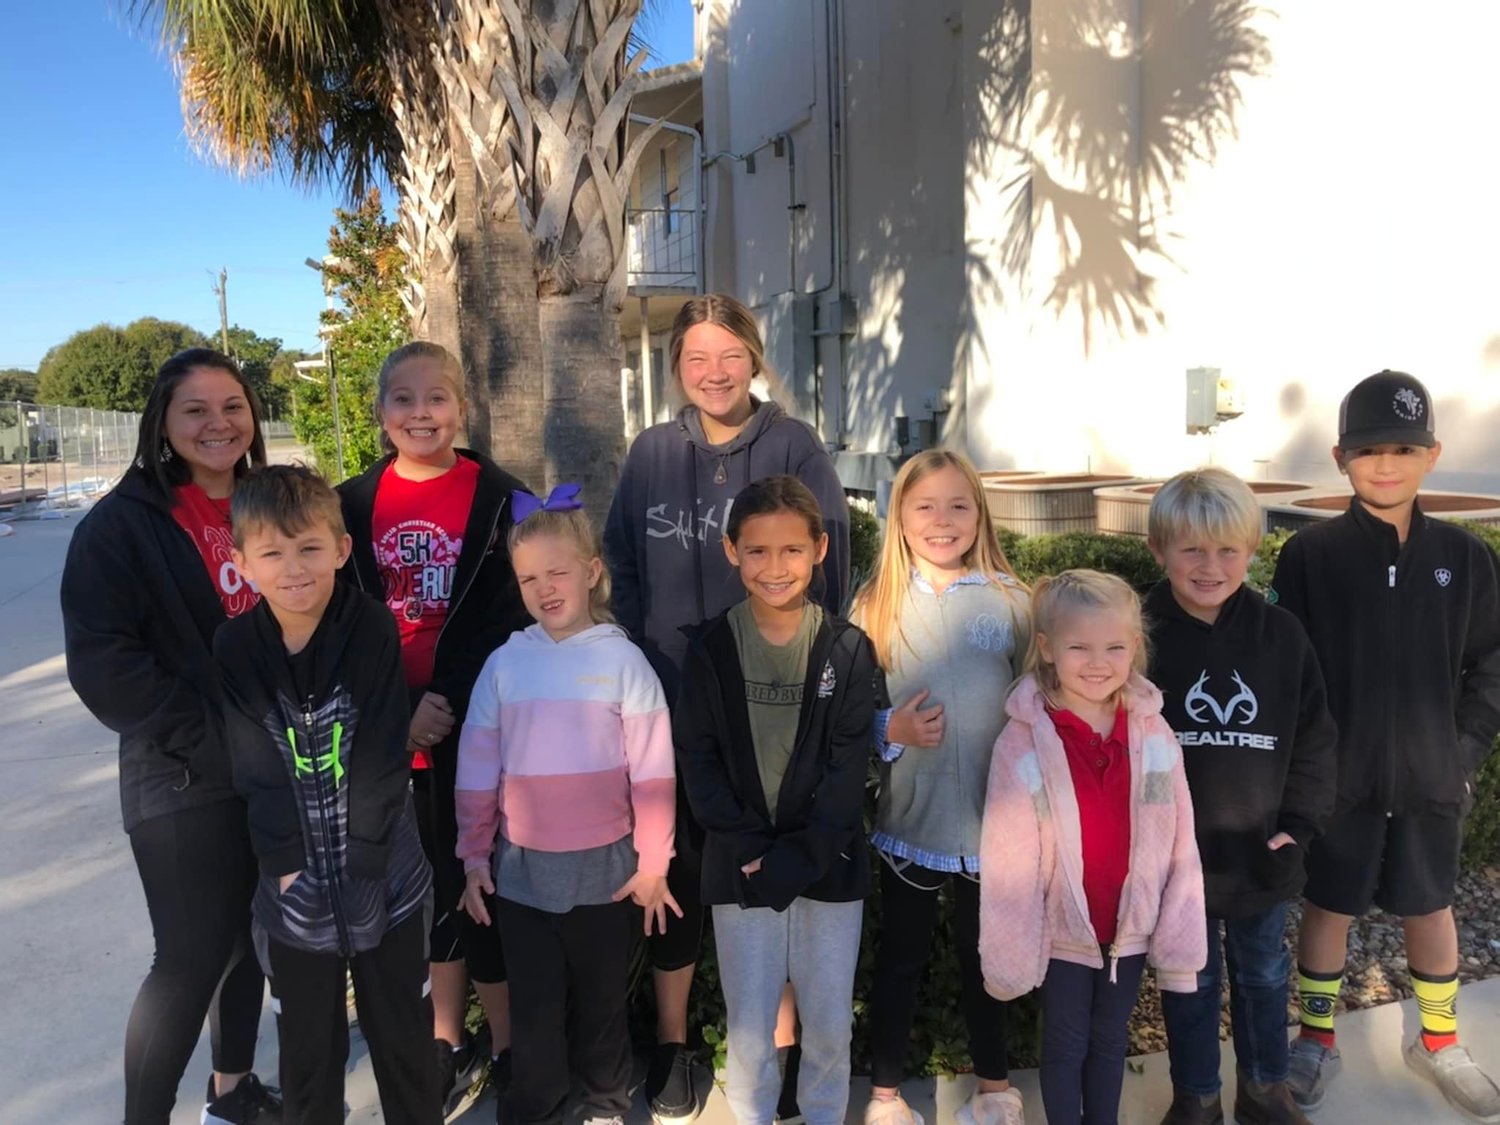 Help us congratulate our November Students of the Month: Emma, Hannah, Ruby, Arturo, Bailey, Rylan, Elizabeth, Ryhett, Parker, & Jersey! Not pictured: Daisy!